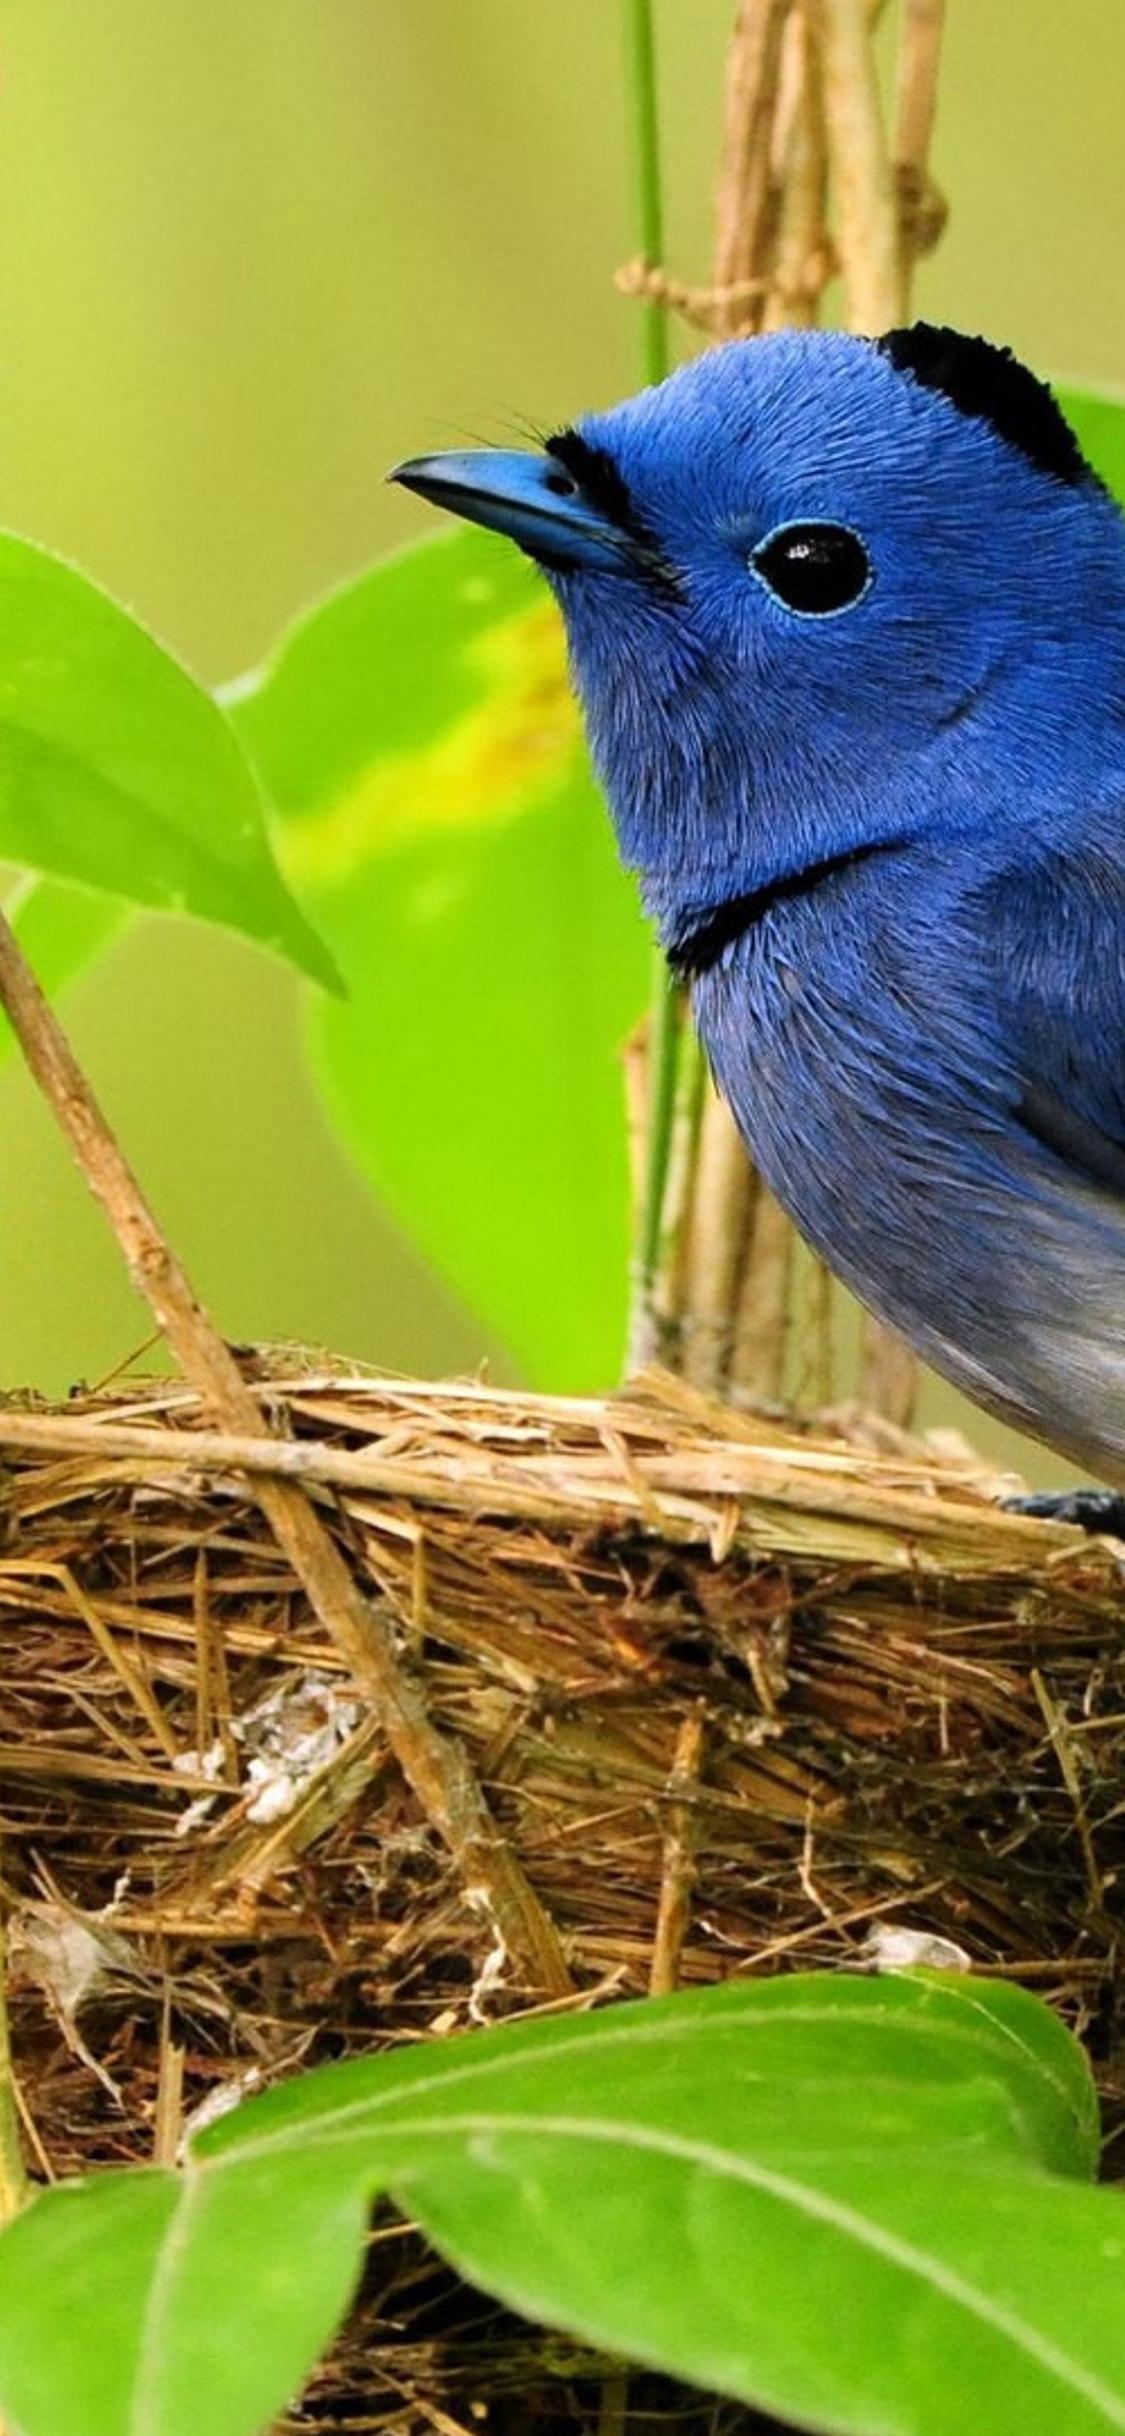 A sweet blue and white bird on nest